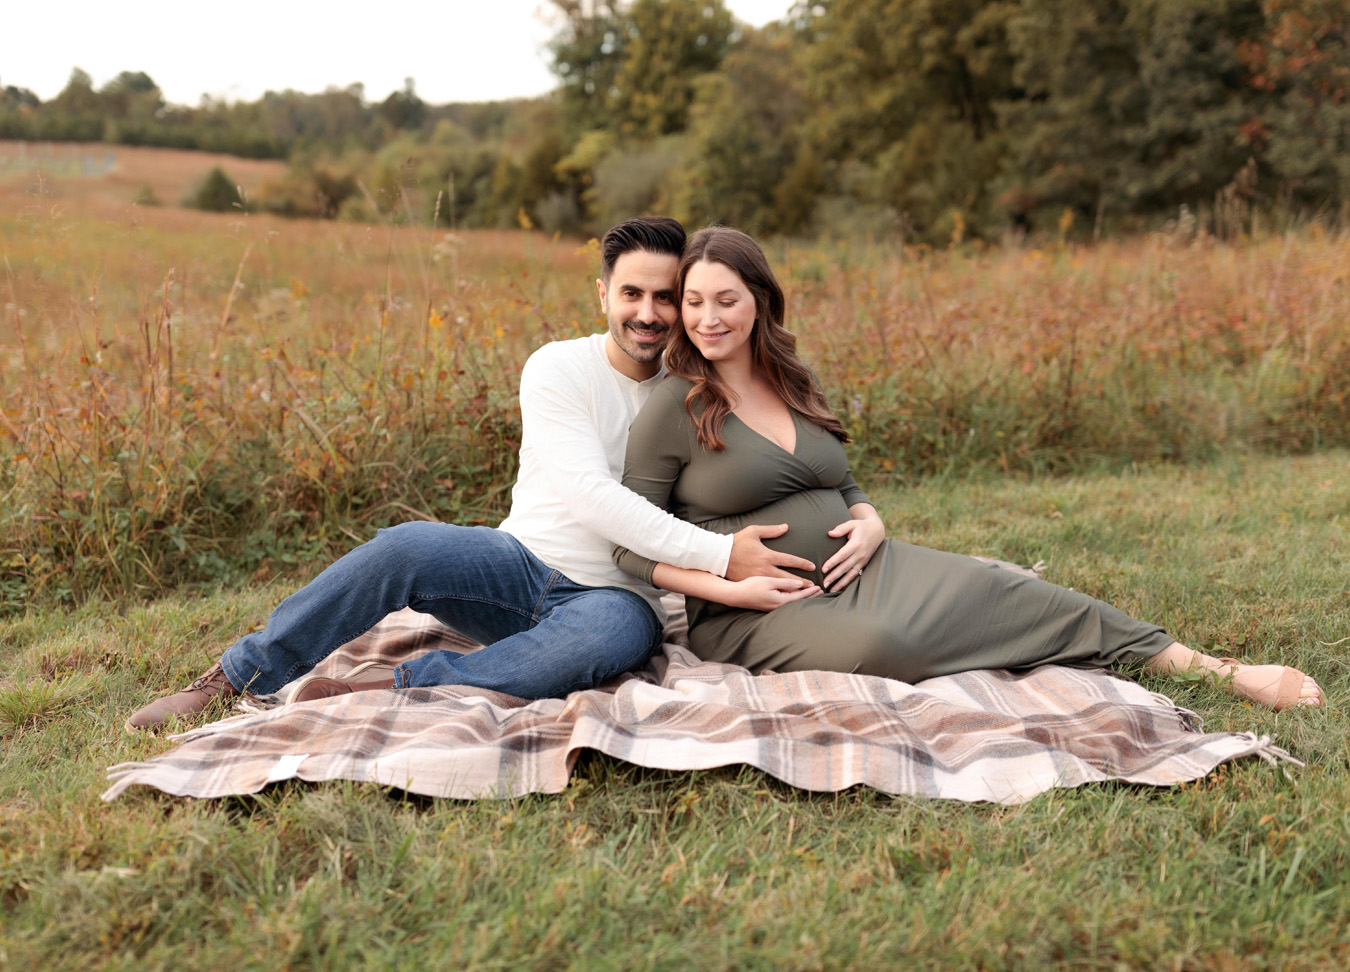 holiday foods to avoid during pregnancy featuring a mom and dad sitting on a blanket in a field